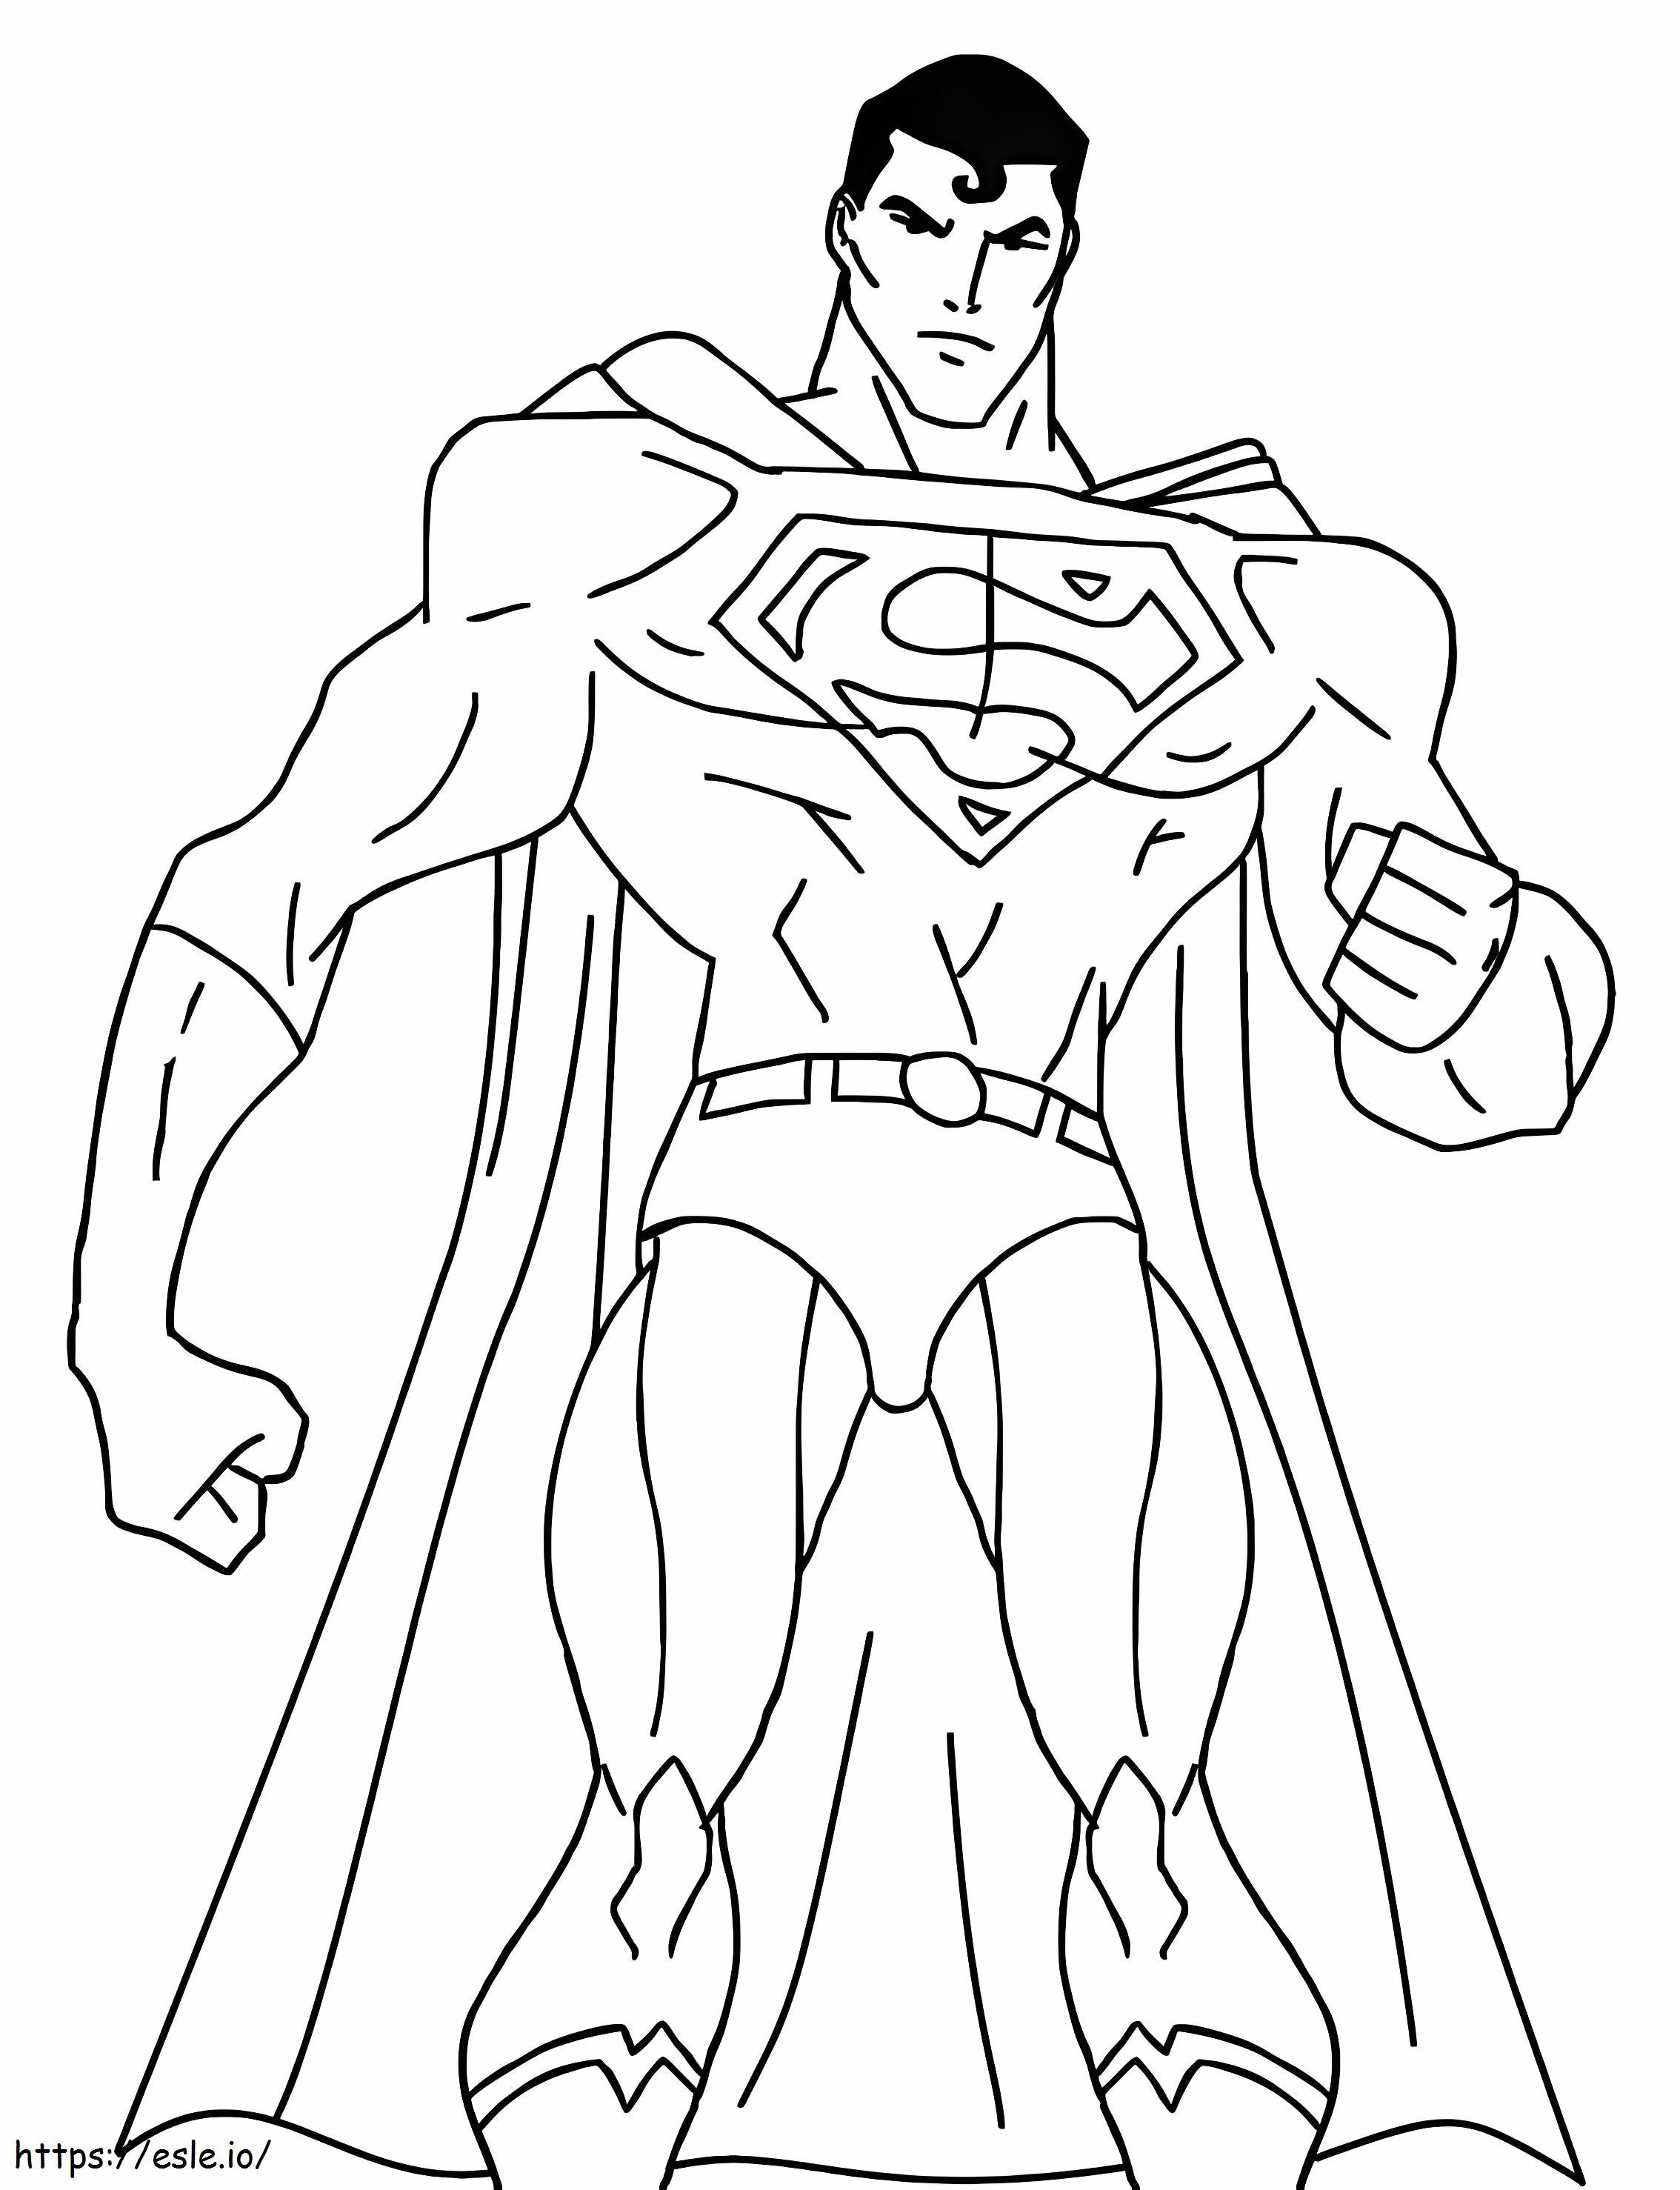 Strong Superman Cool coloring page